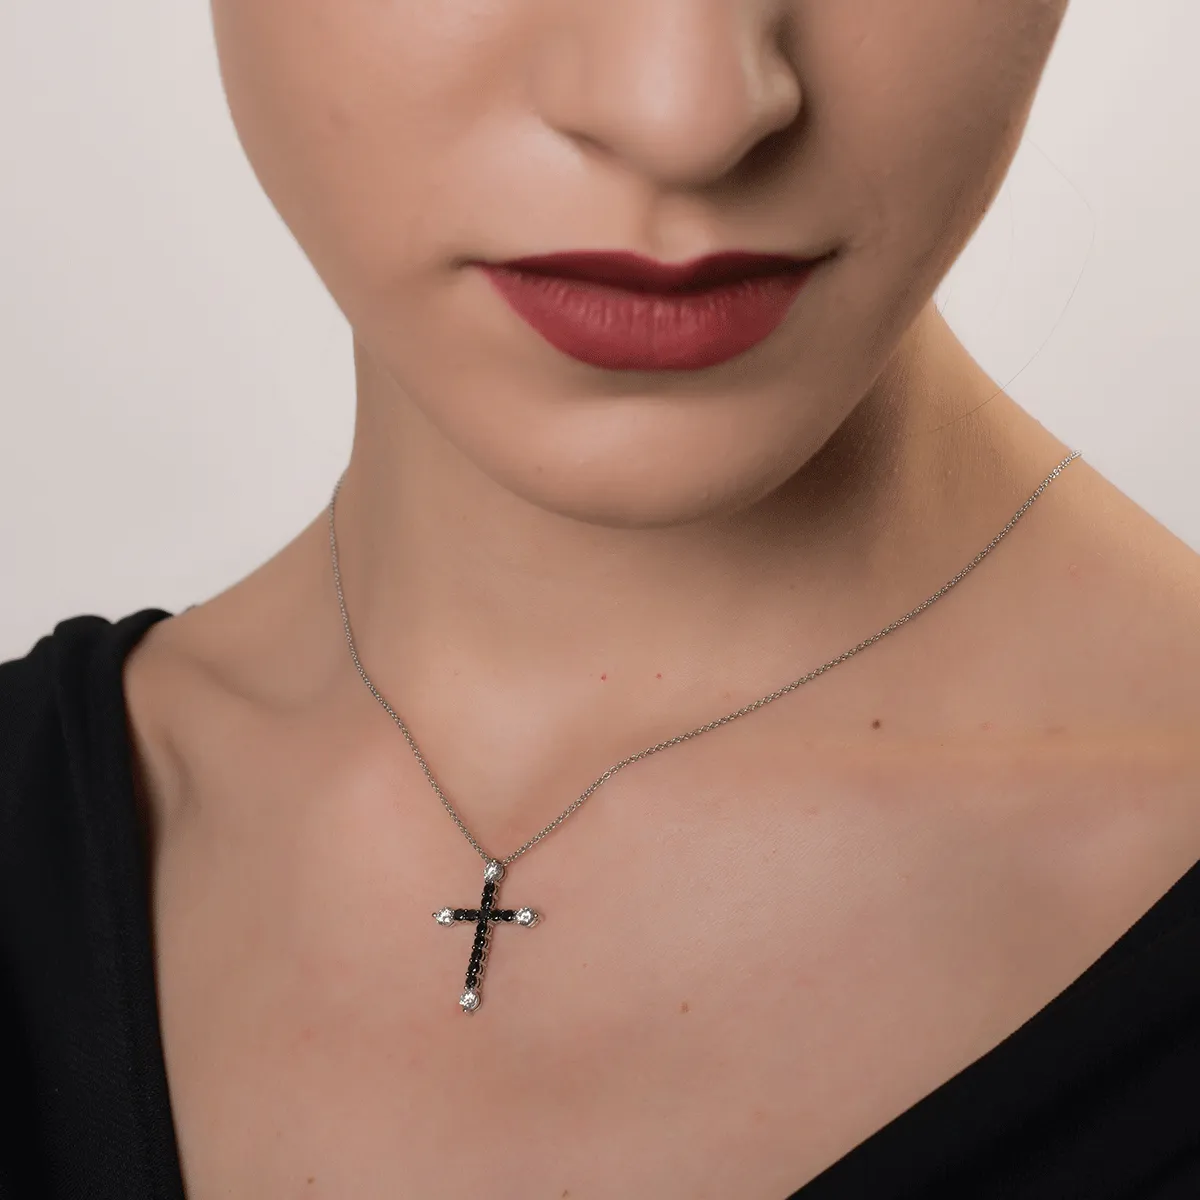 18K white gold cross pendant necklace with 0.5ct clear diamonds and 0.53ct black diamonds